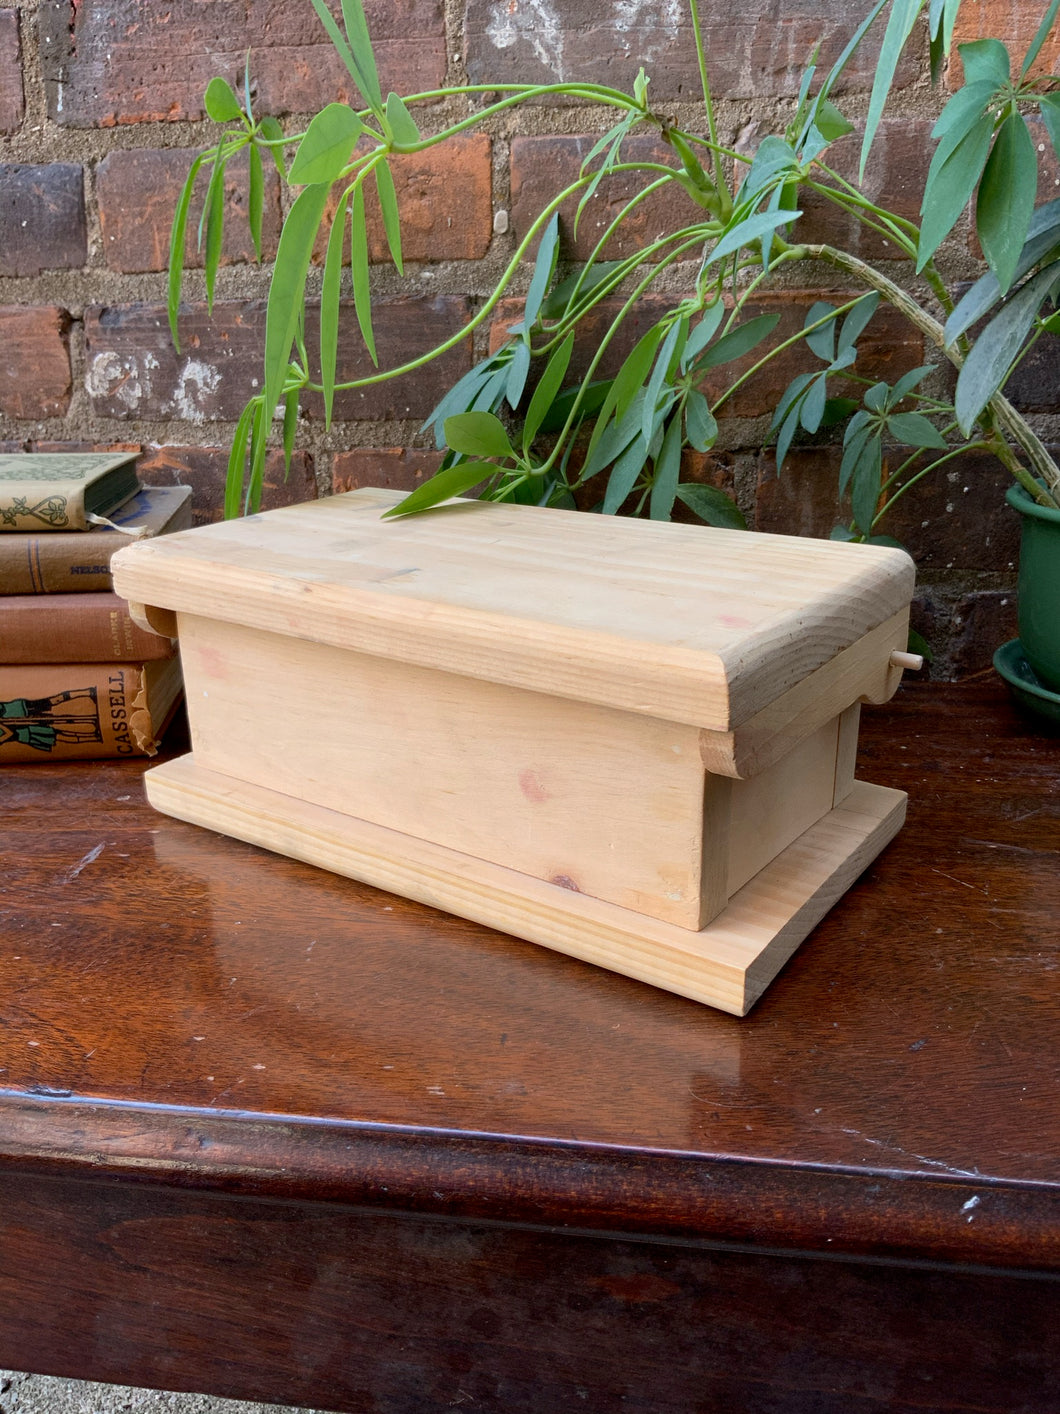 Handcrafted Wooden Box